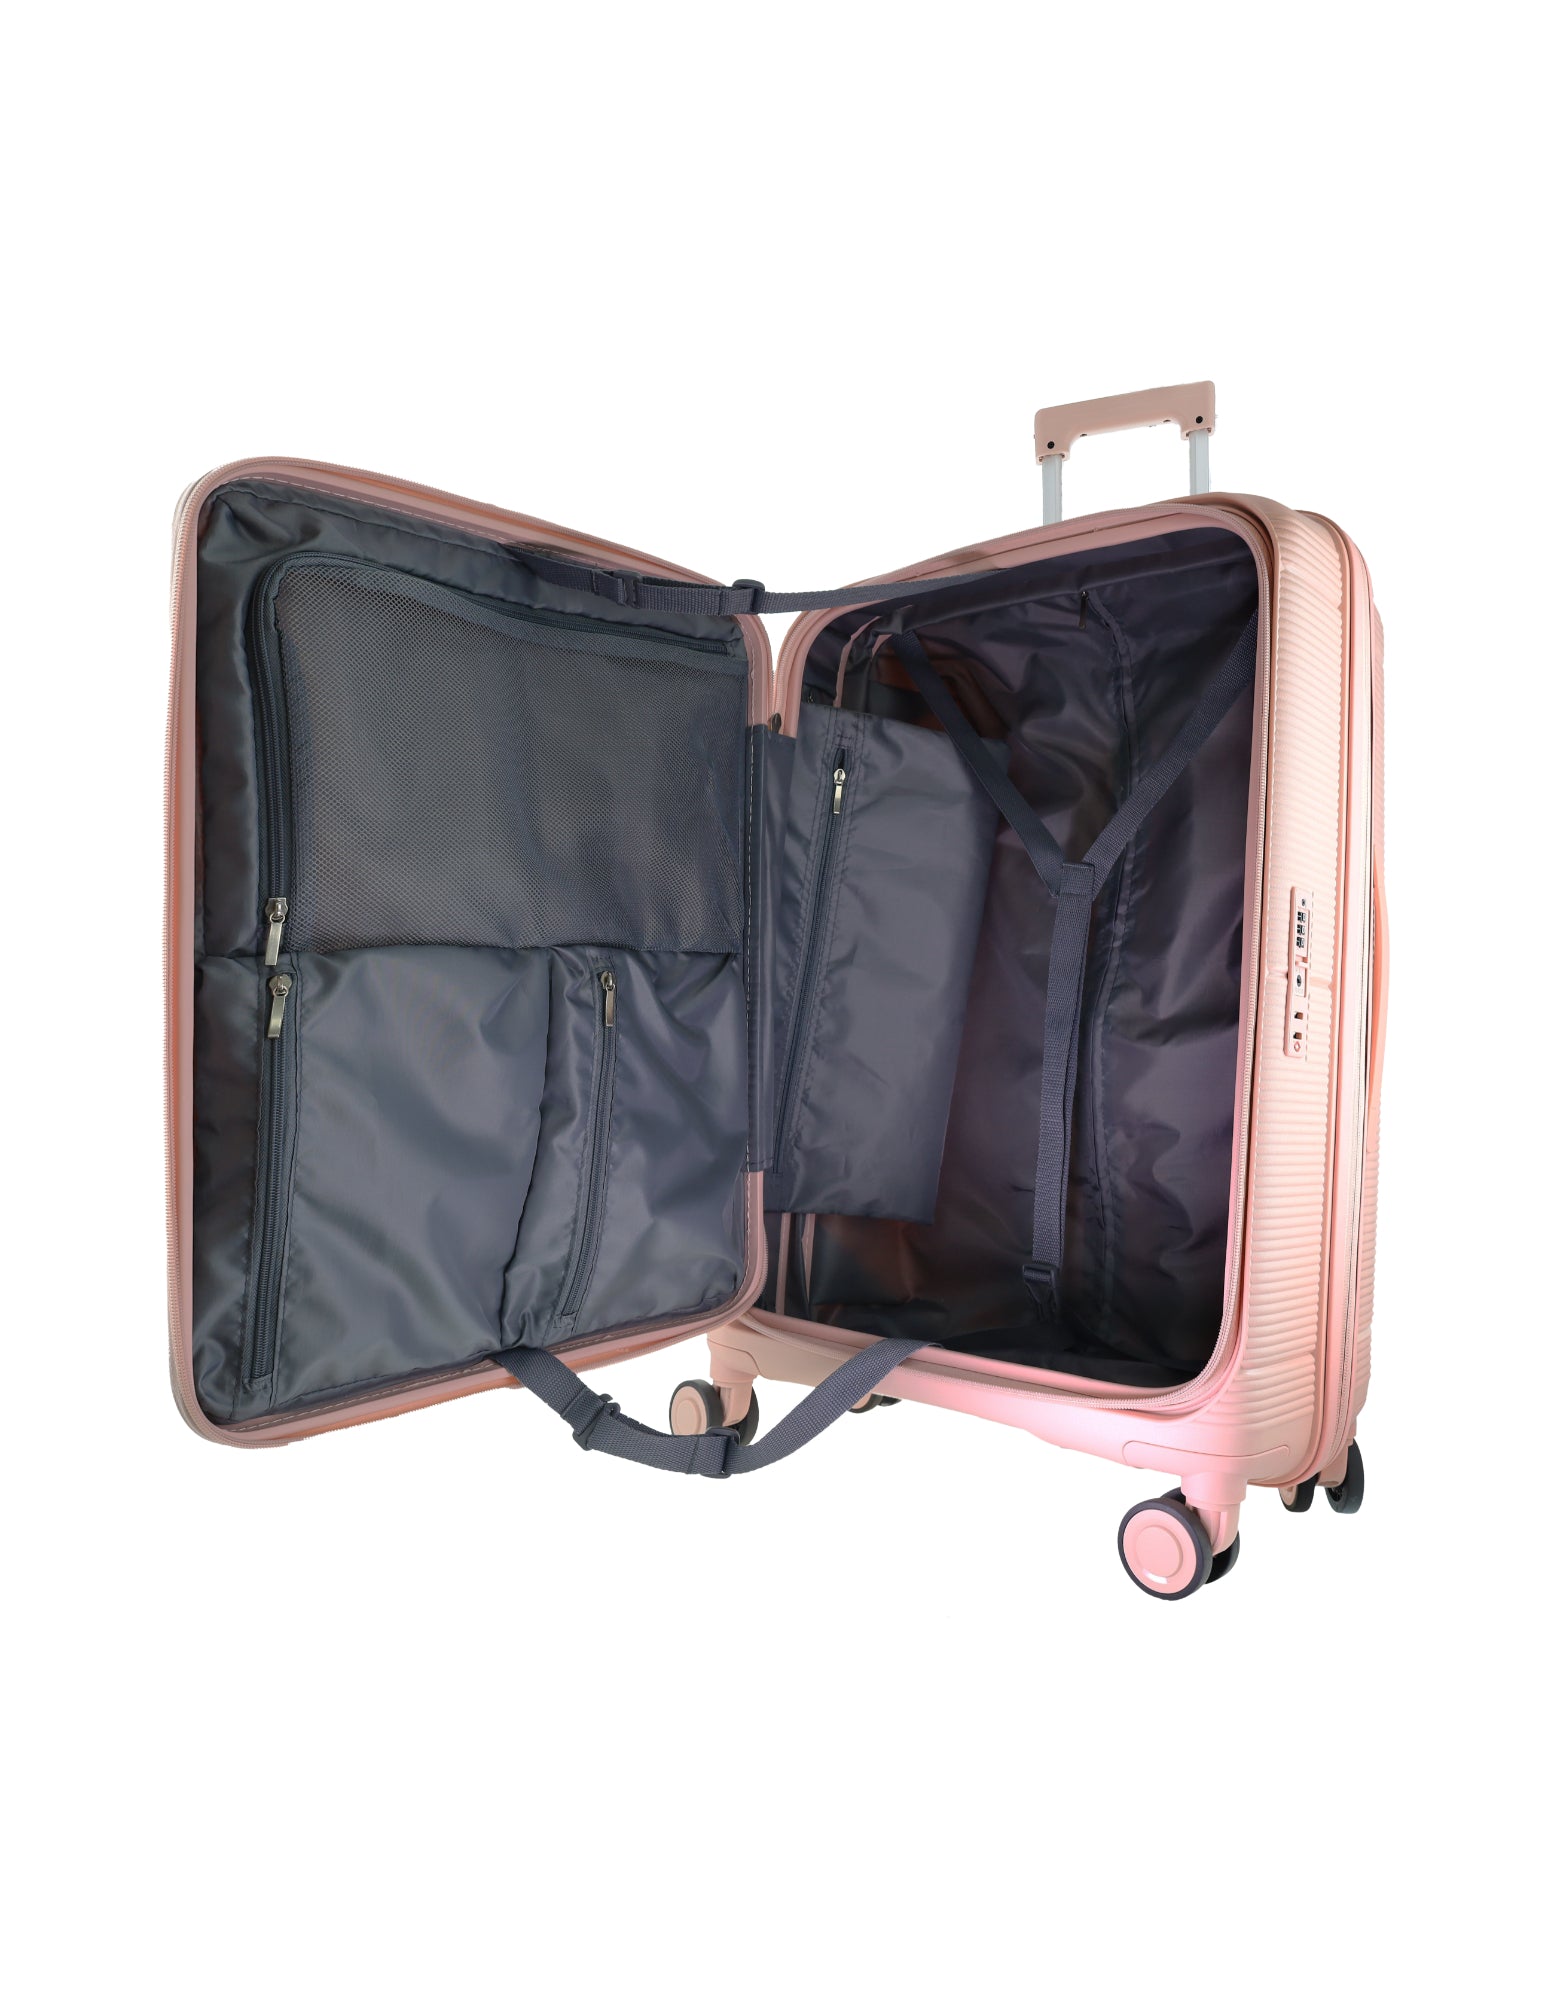 Pierre Cardin 80cm LARGE Hard Shell Suitcase in Blush